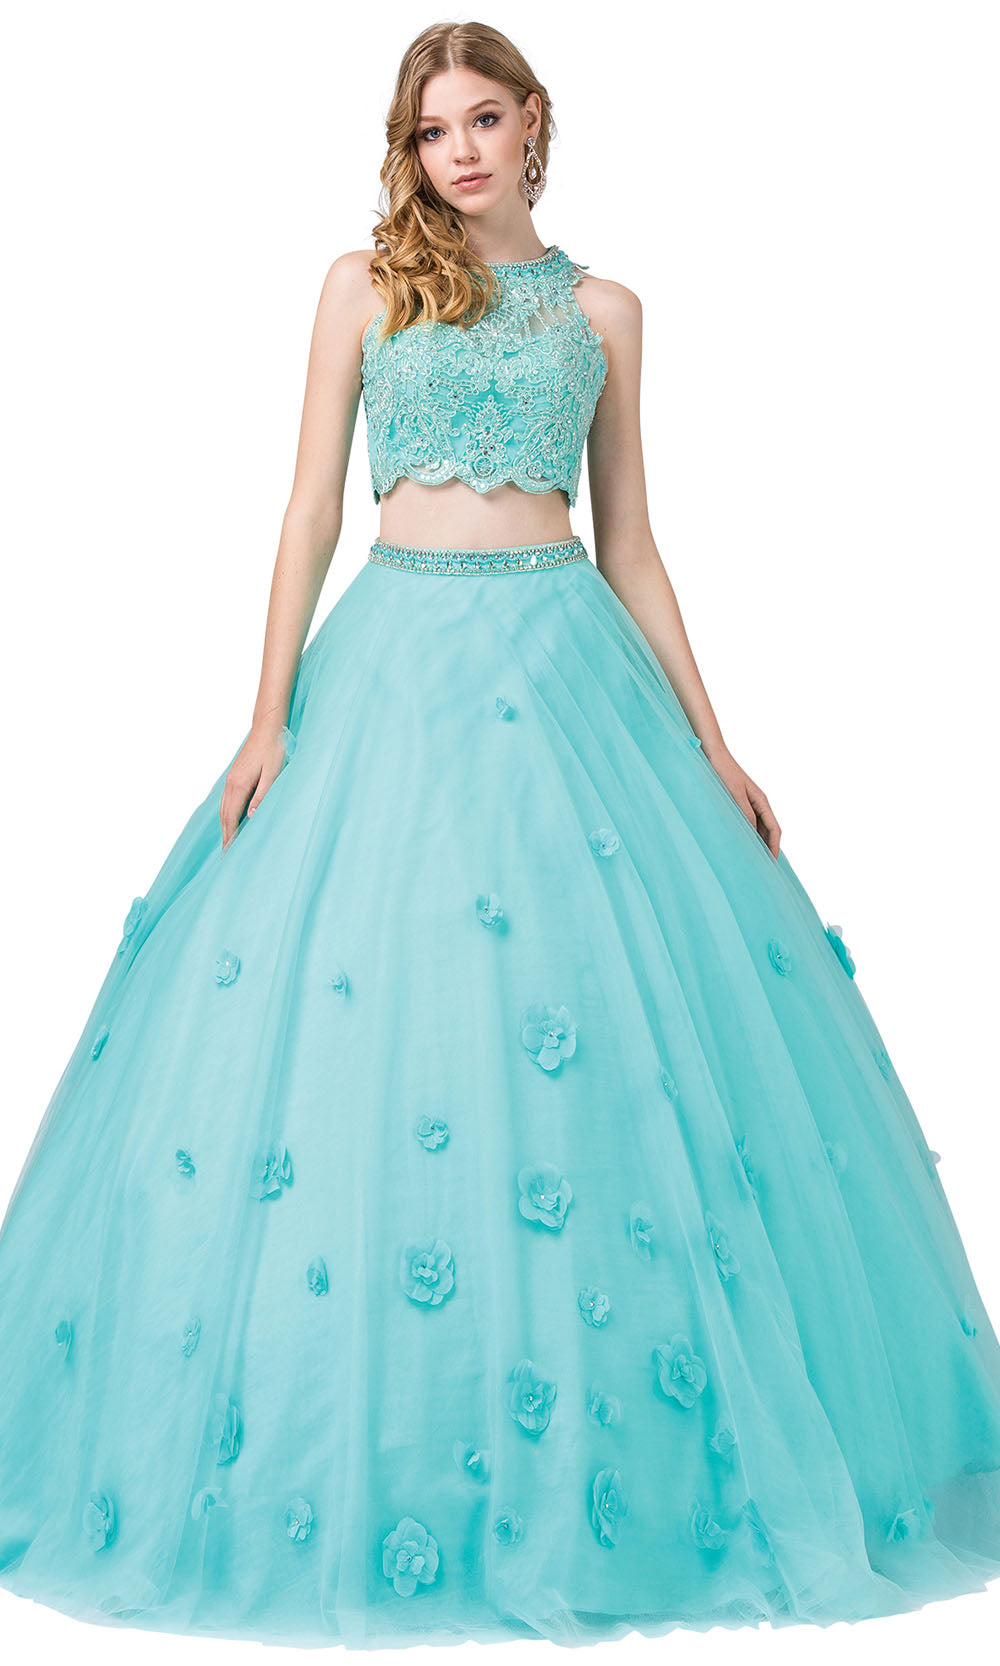 Dancing Queen - 1302 Two Piece Floral Ballgown In Blue